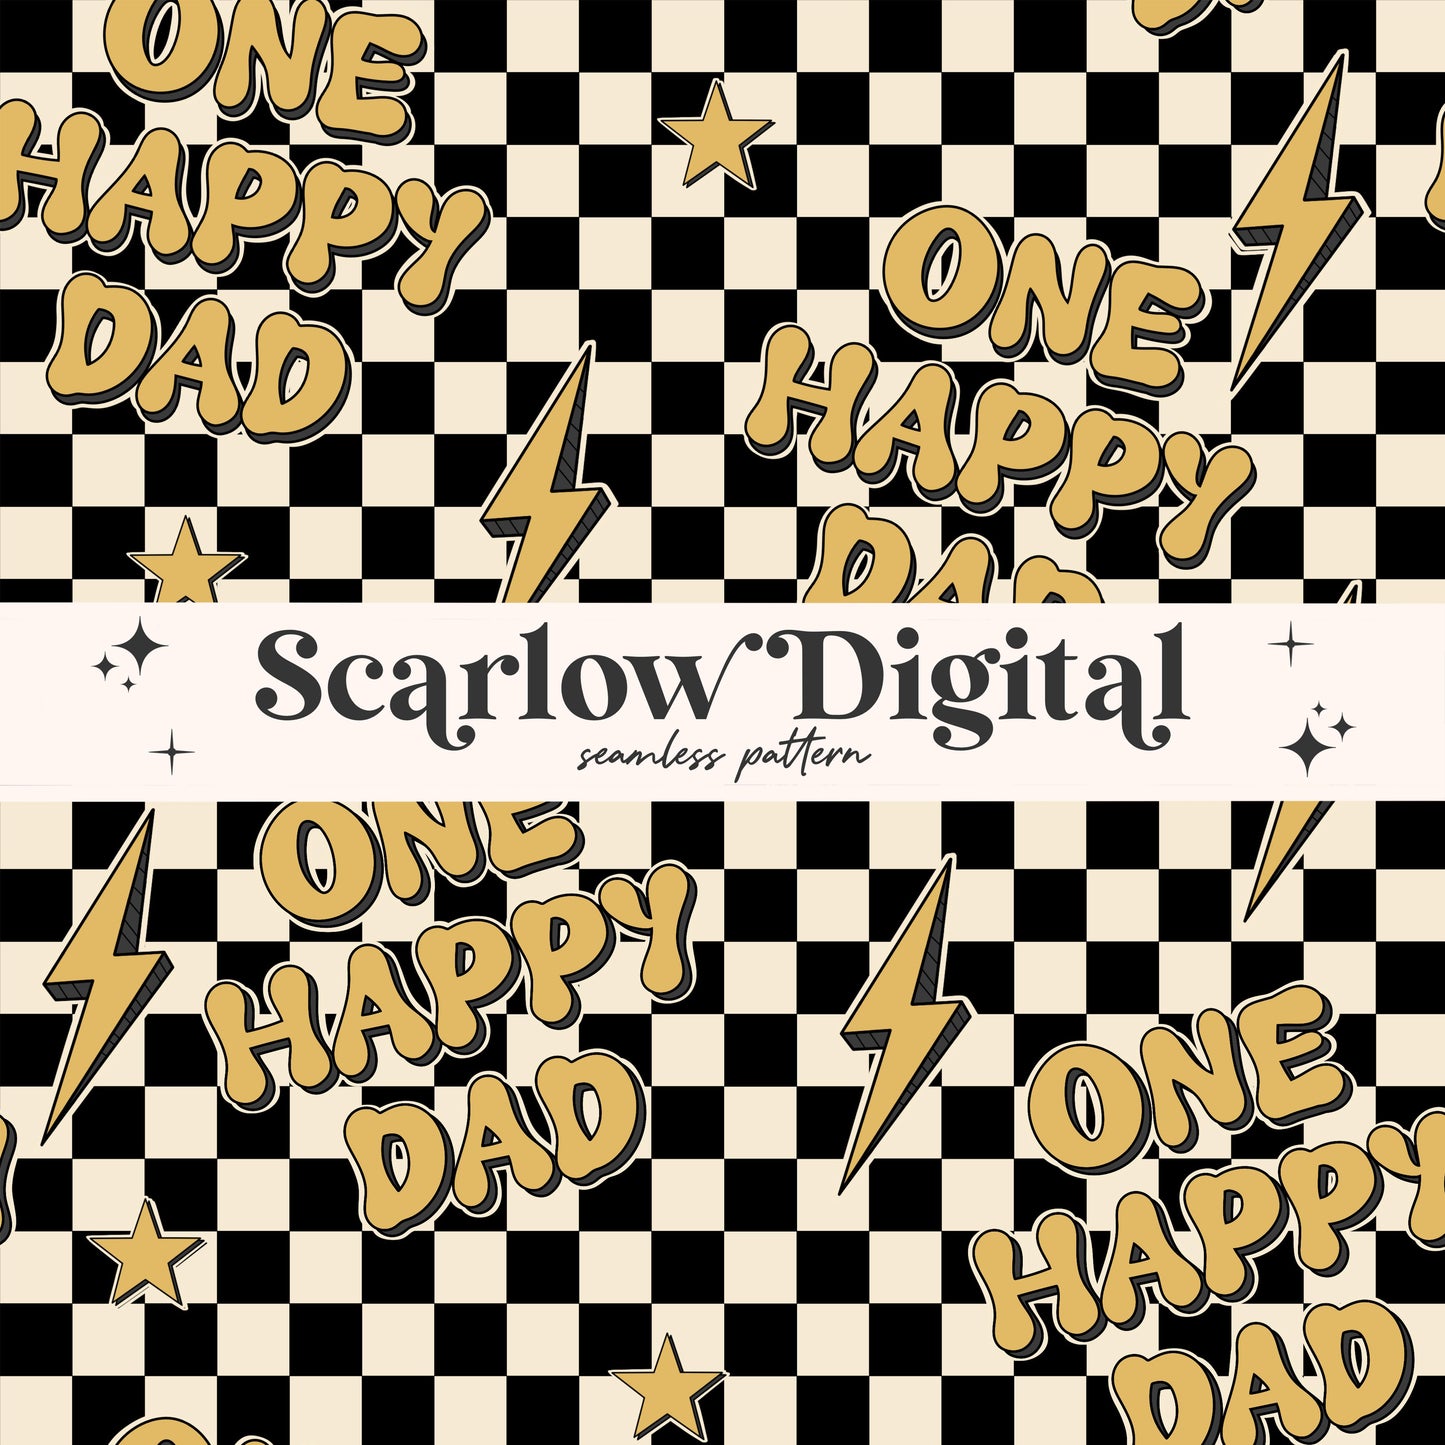 One Happy Dad Seamless Pattern Sublimation Digital Design Download, checkered seamless file, retro sublimation, adult seamless patterns